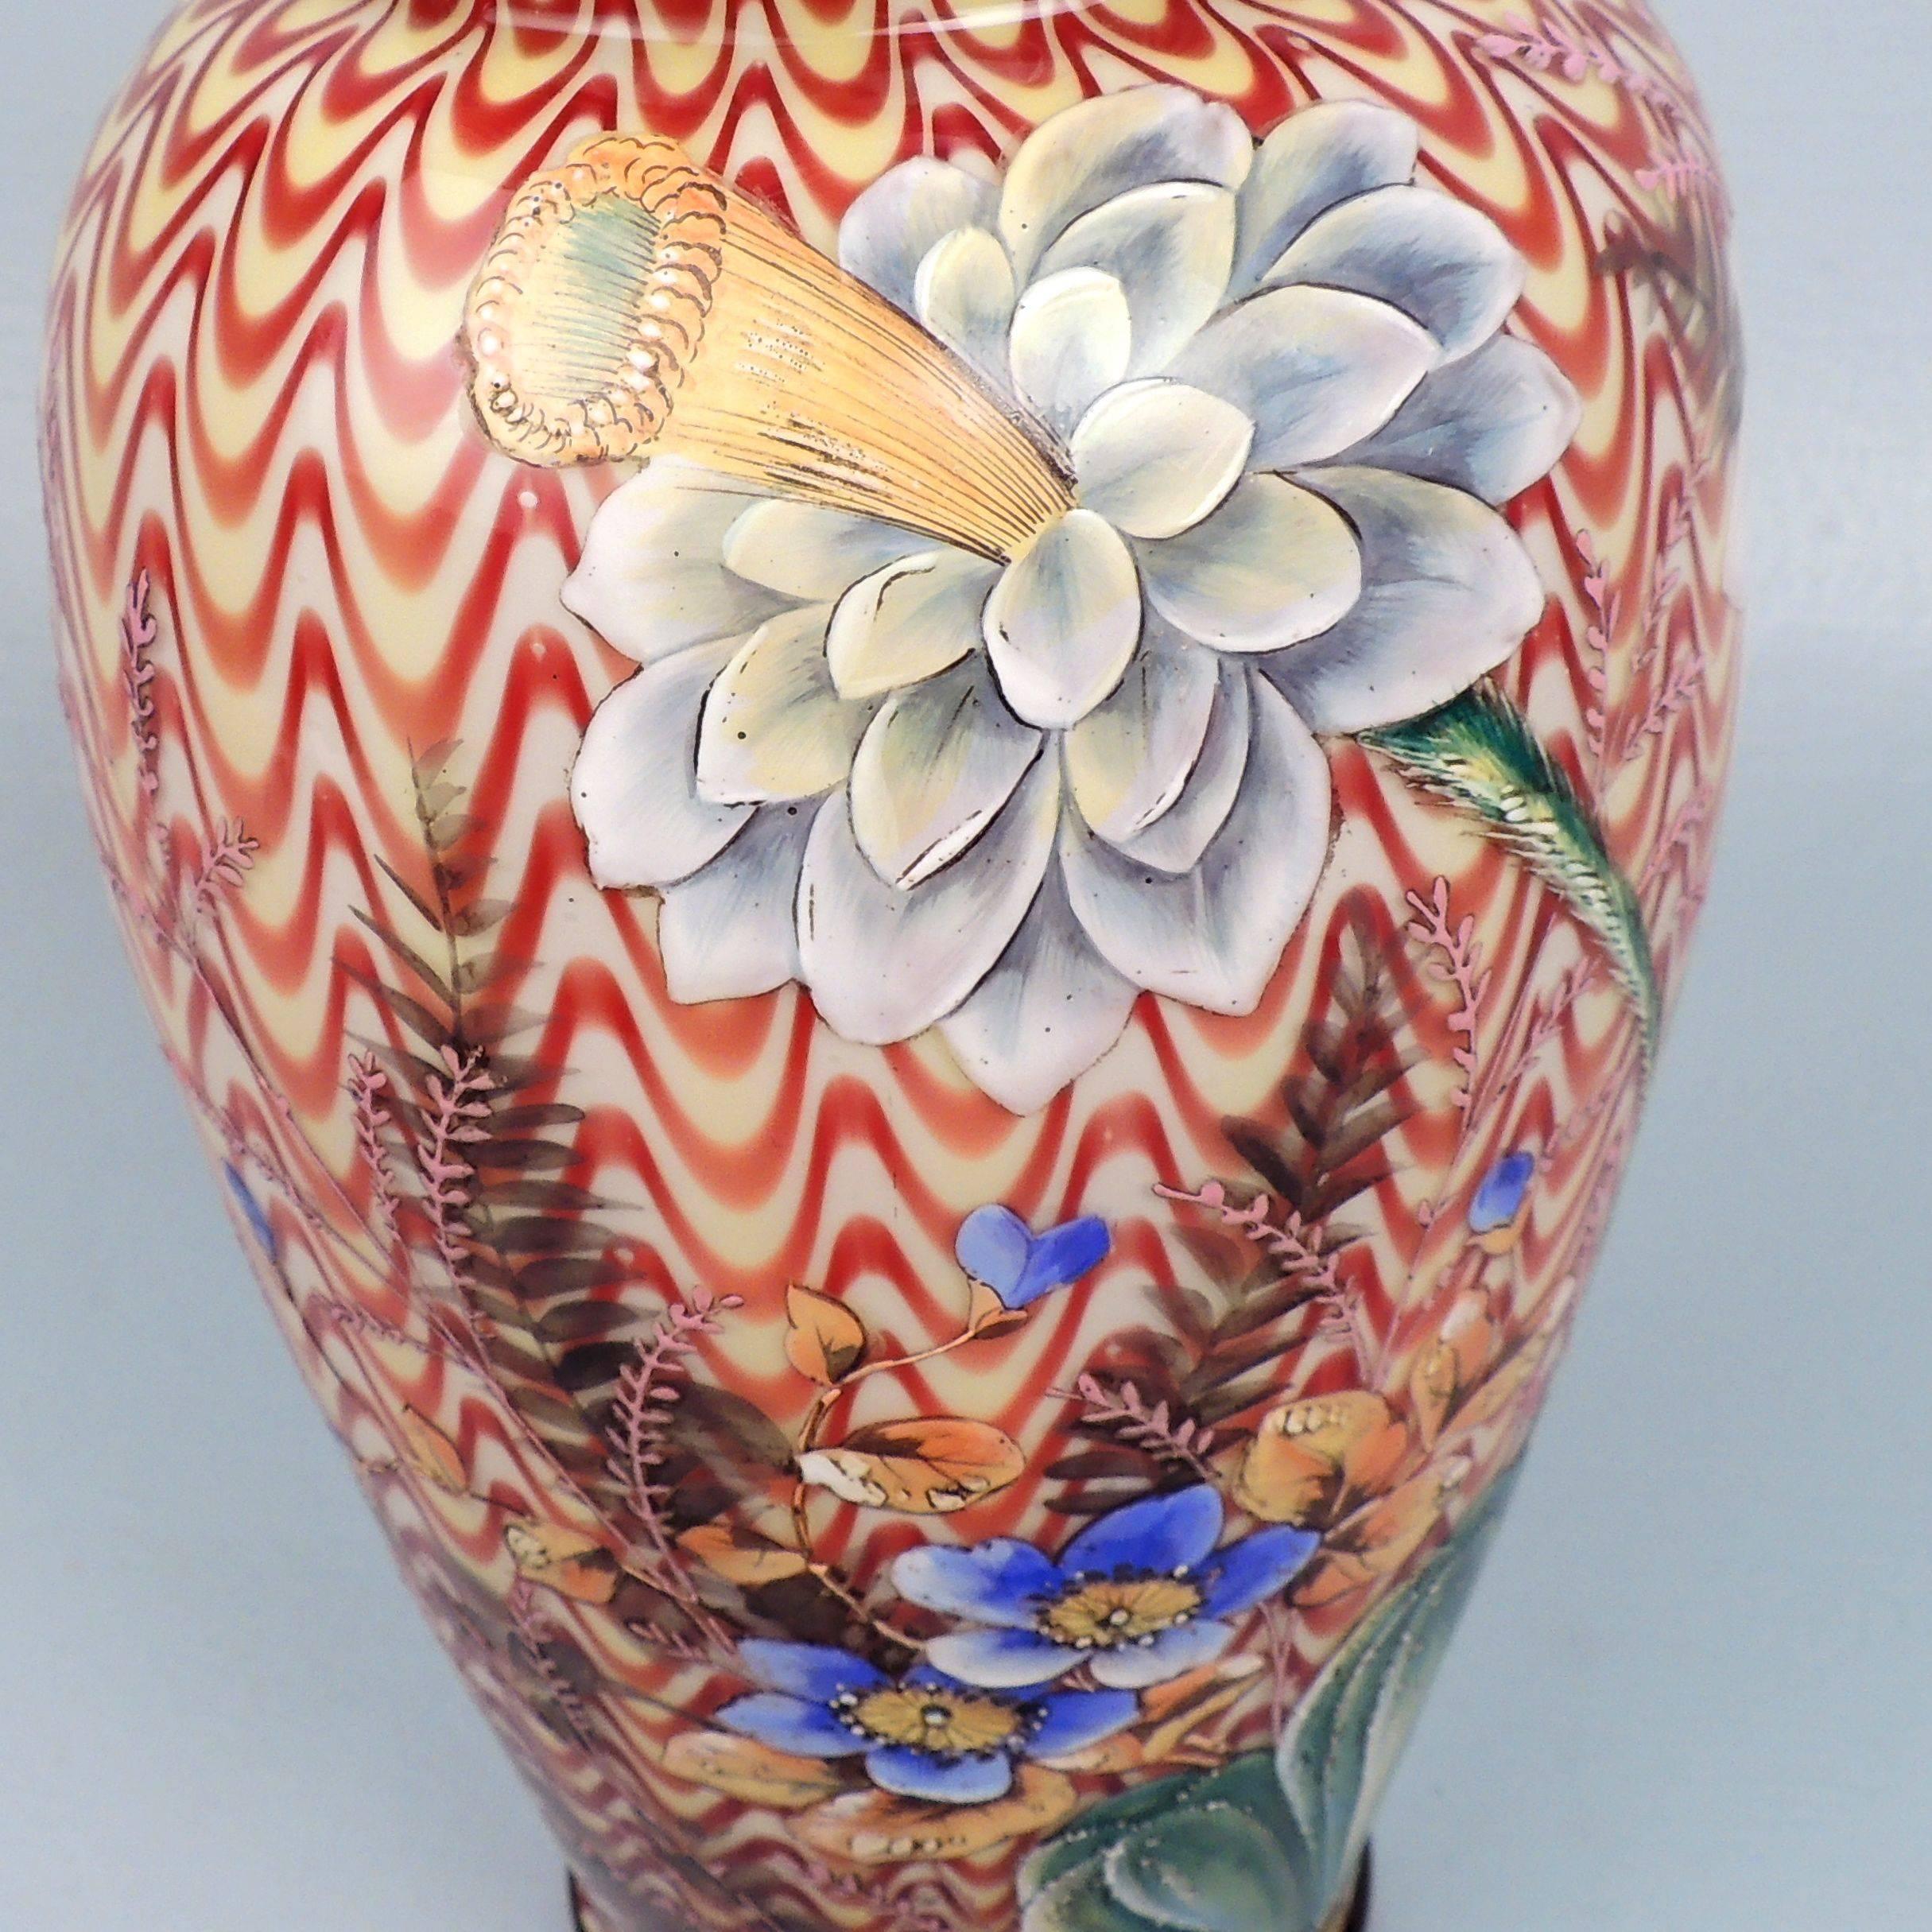 19th Century English Victorian Art Glass Vase with Enameled Flowers by Stevens & Williams